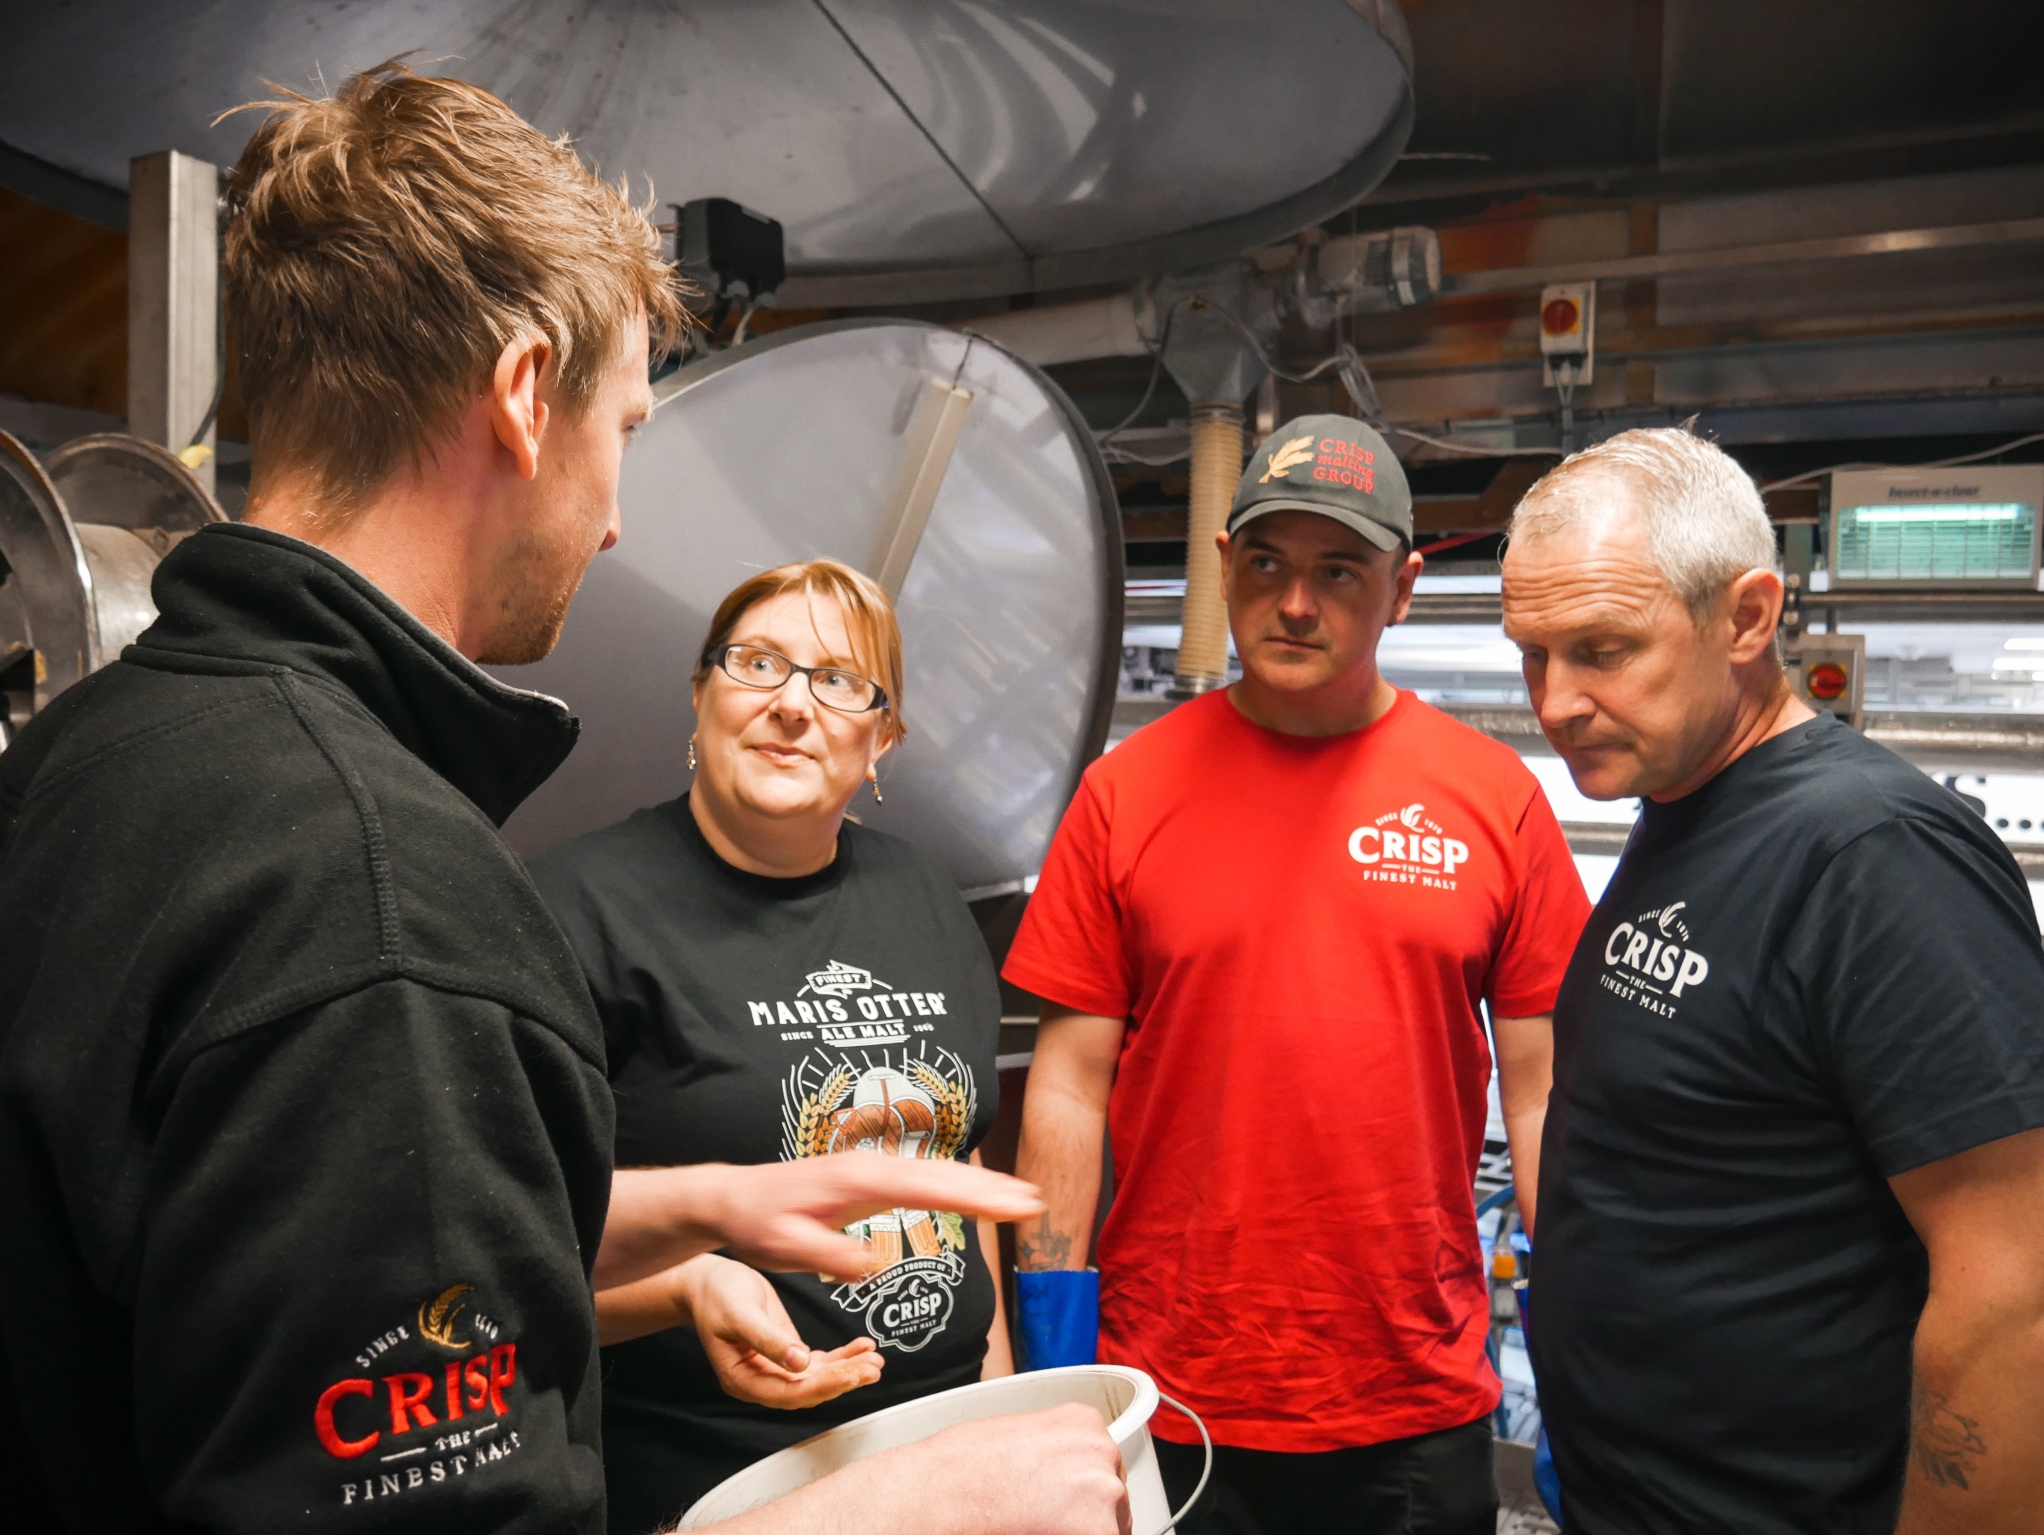 Crisp Malt work together with craft brewery - Lacons Brewery on a brew day